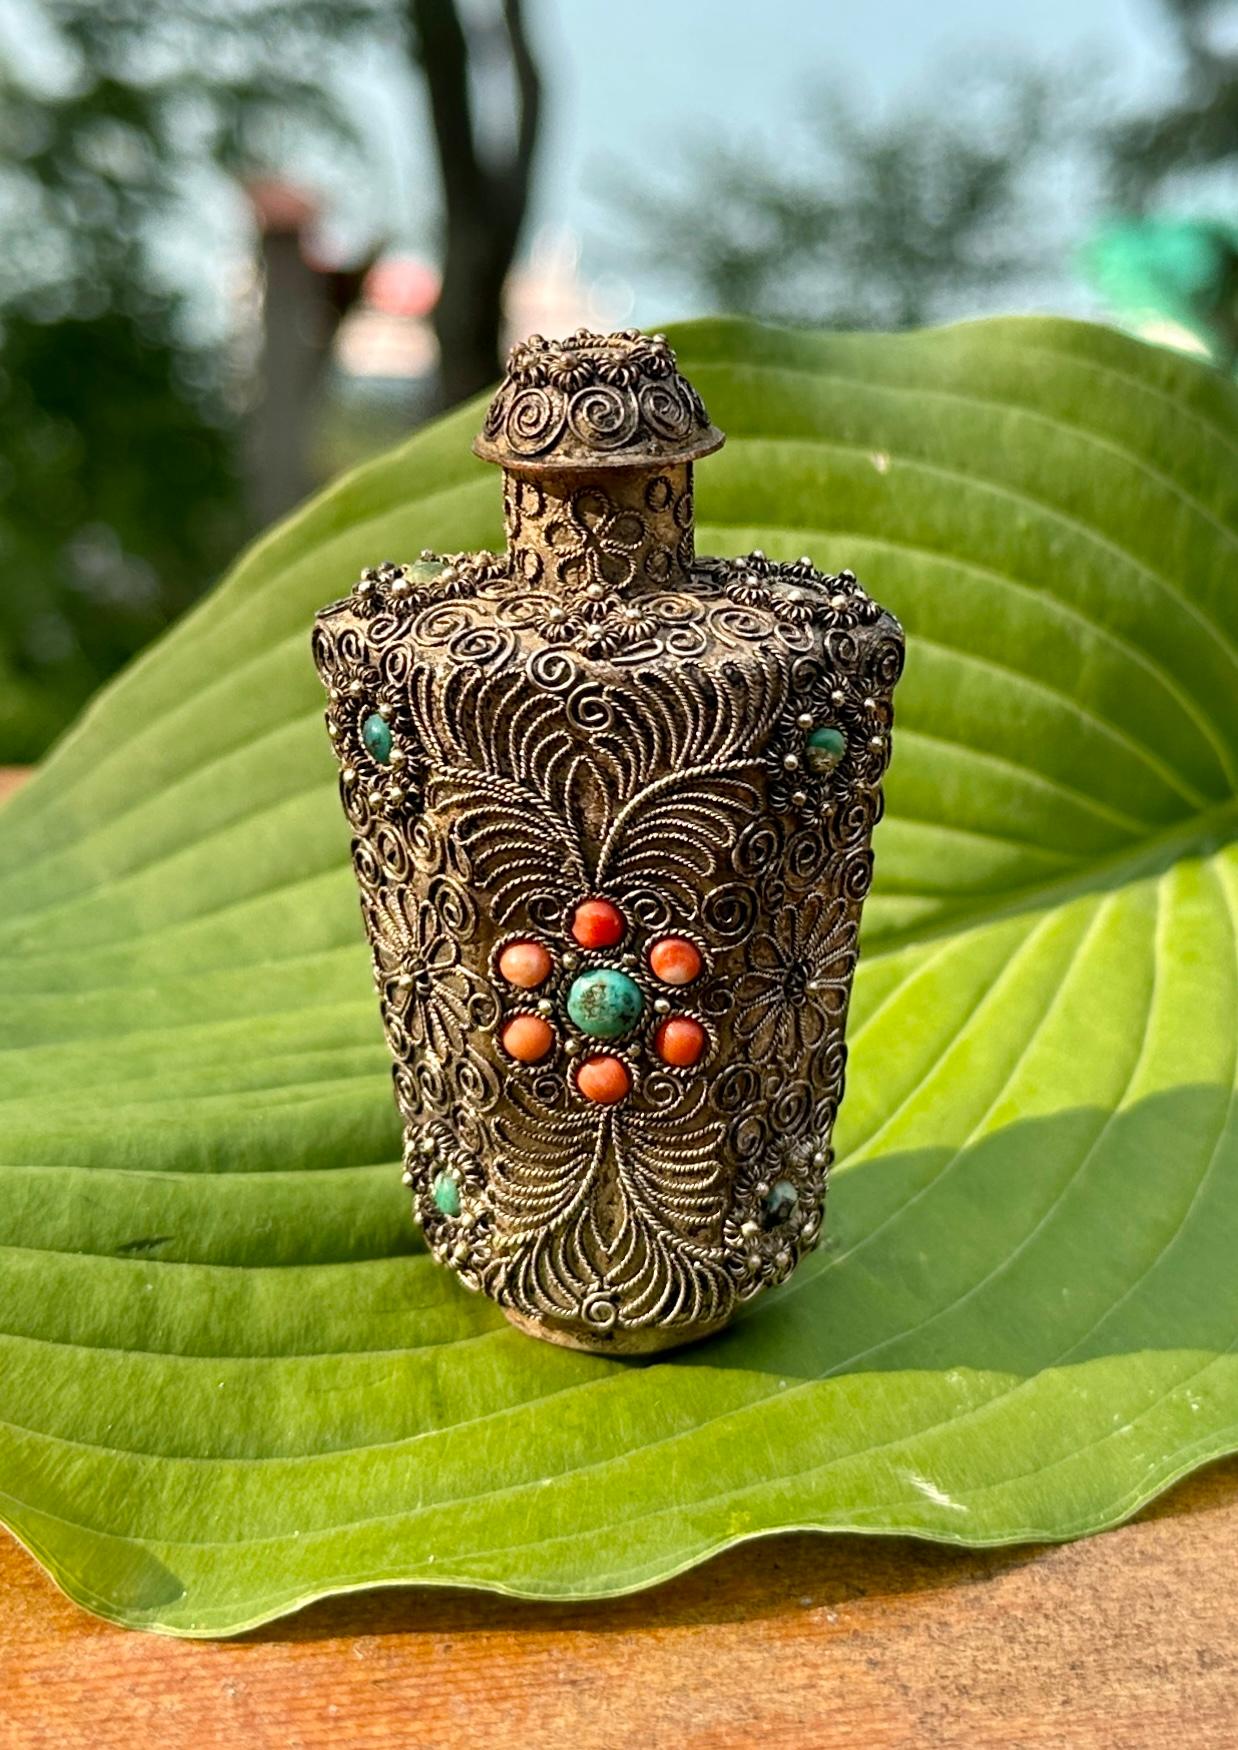 THIS IS AN ANTIQUE ART DECO SILVER FILIGREE CHINESE EXPORT CORAL AND TURQUOISE PERFUME BOTTLE, SNUFF BOTTLE.   THE SILVER FILIGREE IS OF THE HIGHEST QUALITY  - THIS IS AN ANTIQUE PIECE THAT DATES TO THE 19TH - EARLY 20TH CENTURY.
The bottle is